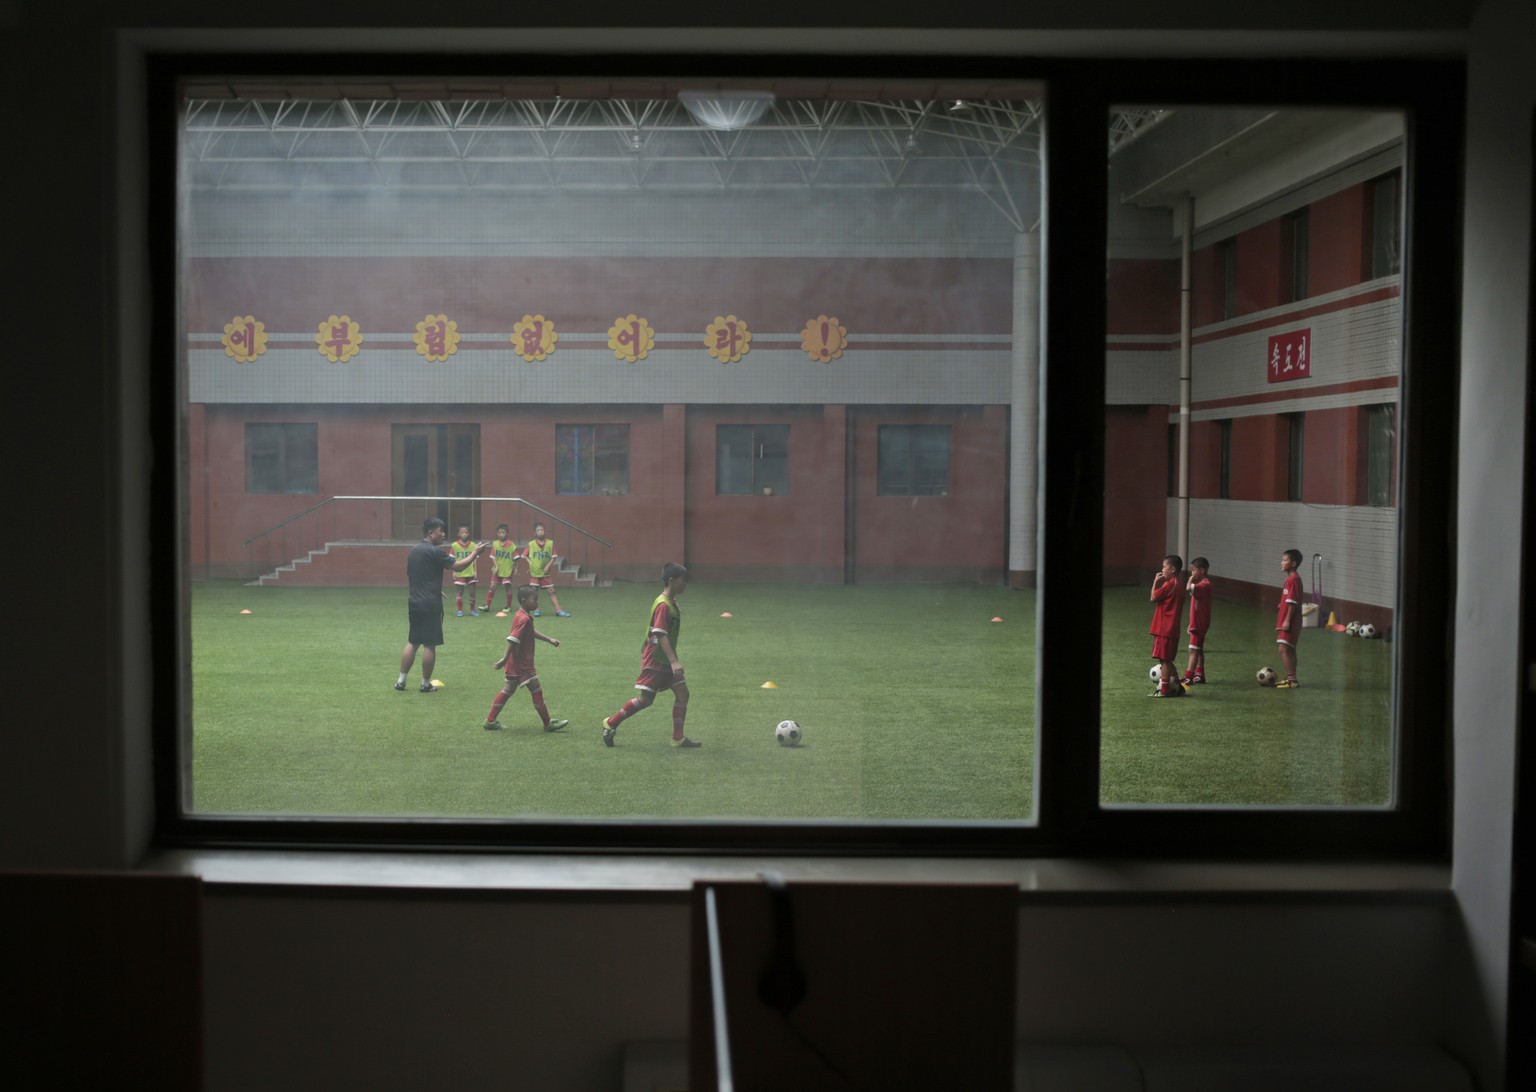 Children practice soccer at Pyongyang International Football School in Pyongyang, North Korea, Wednesday, Aug. 24, 2016. North Korea has poured funds into the development and training of promising ath ...